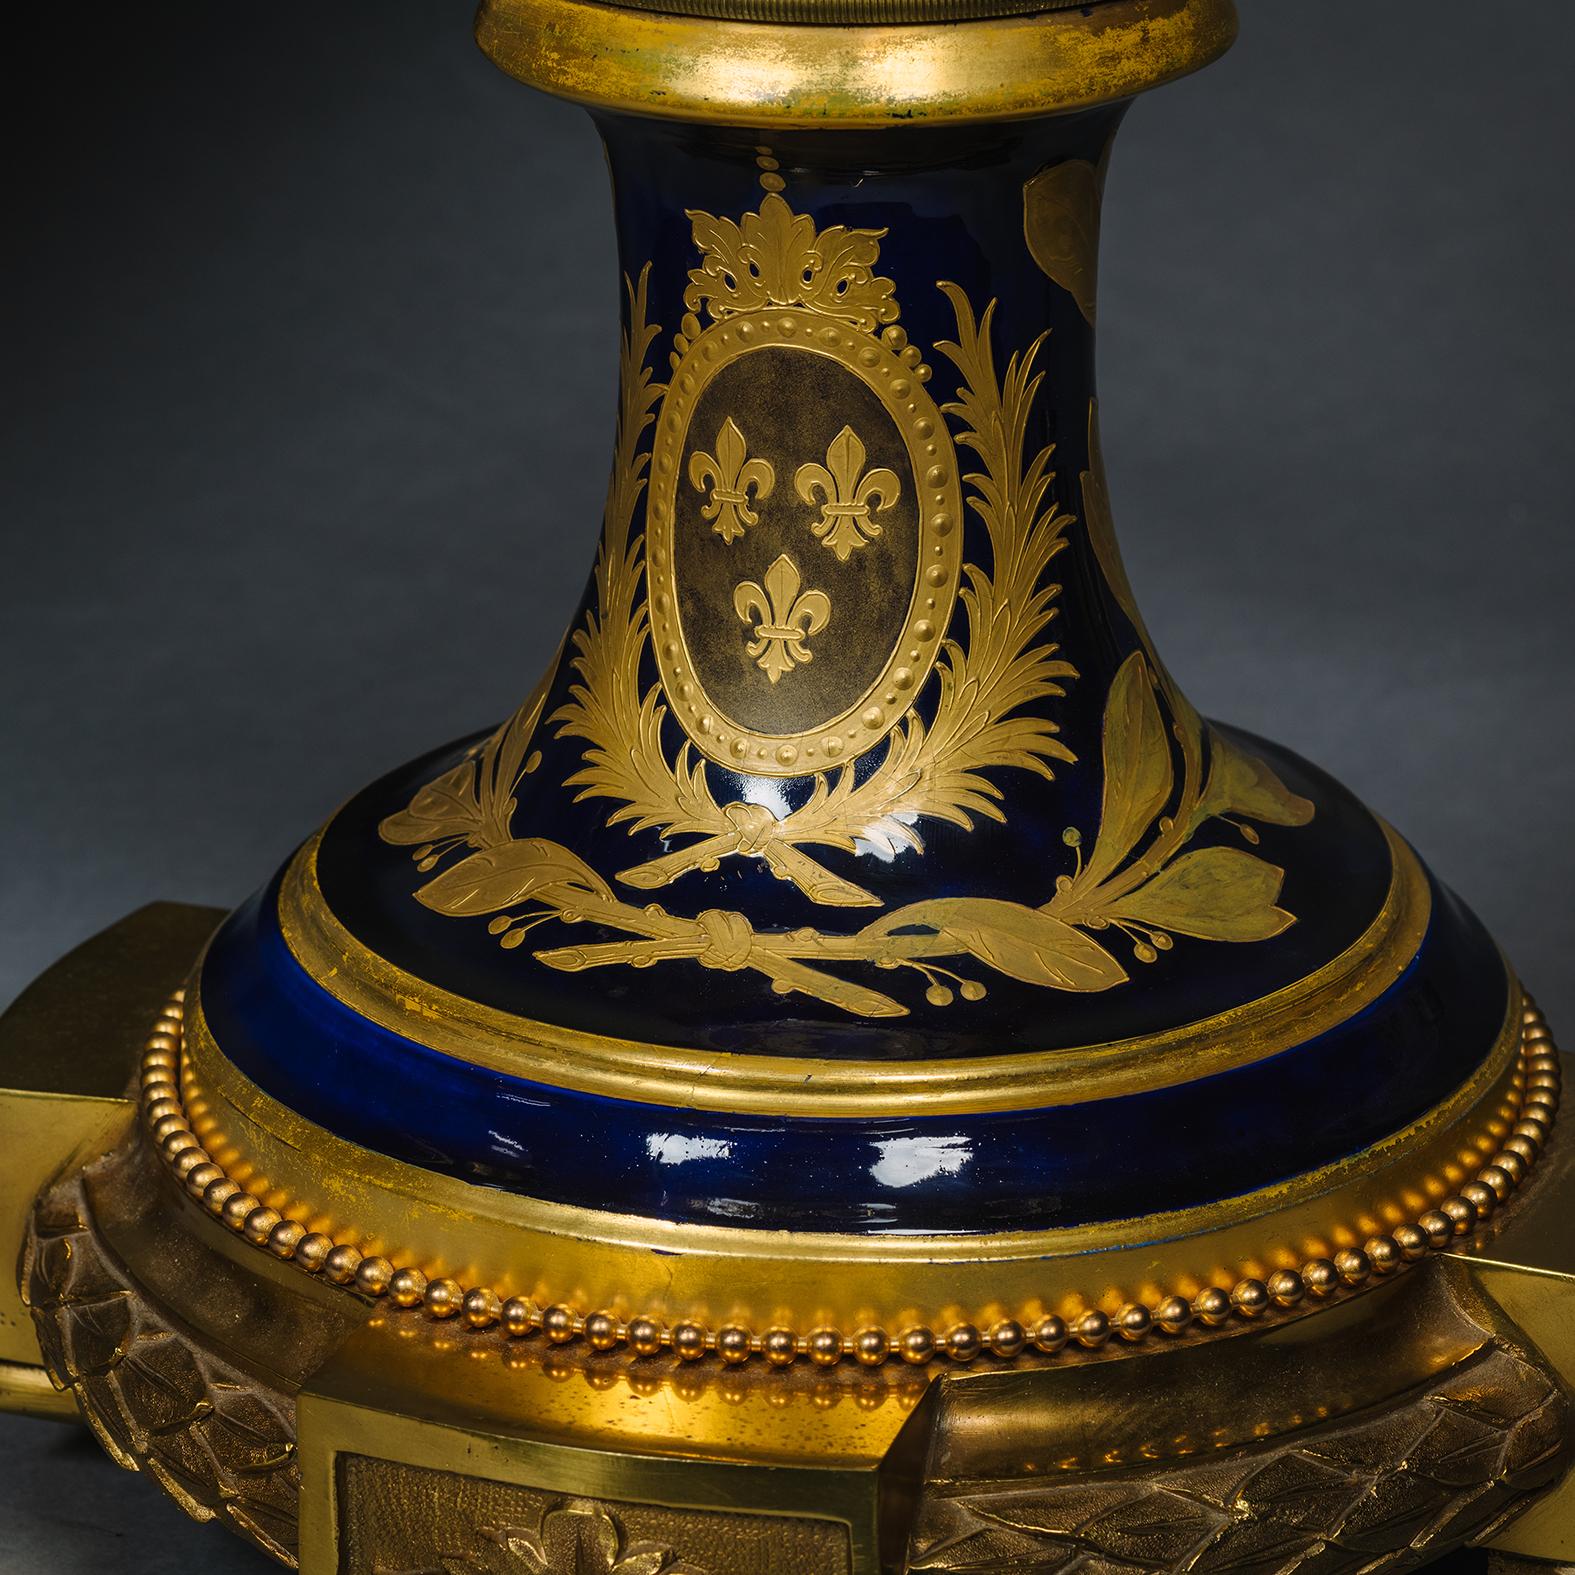 A Pair of Large Gilt-Bronze Mounted Sèvres-Style Porcelain Vases For Sale 2